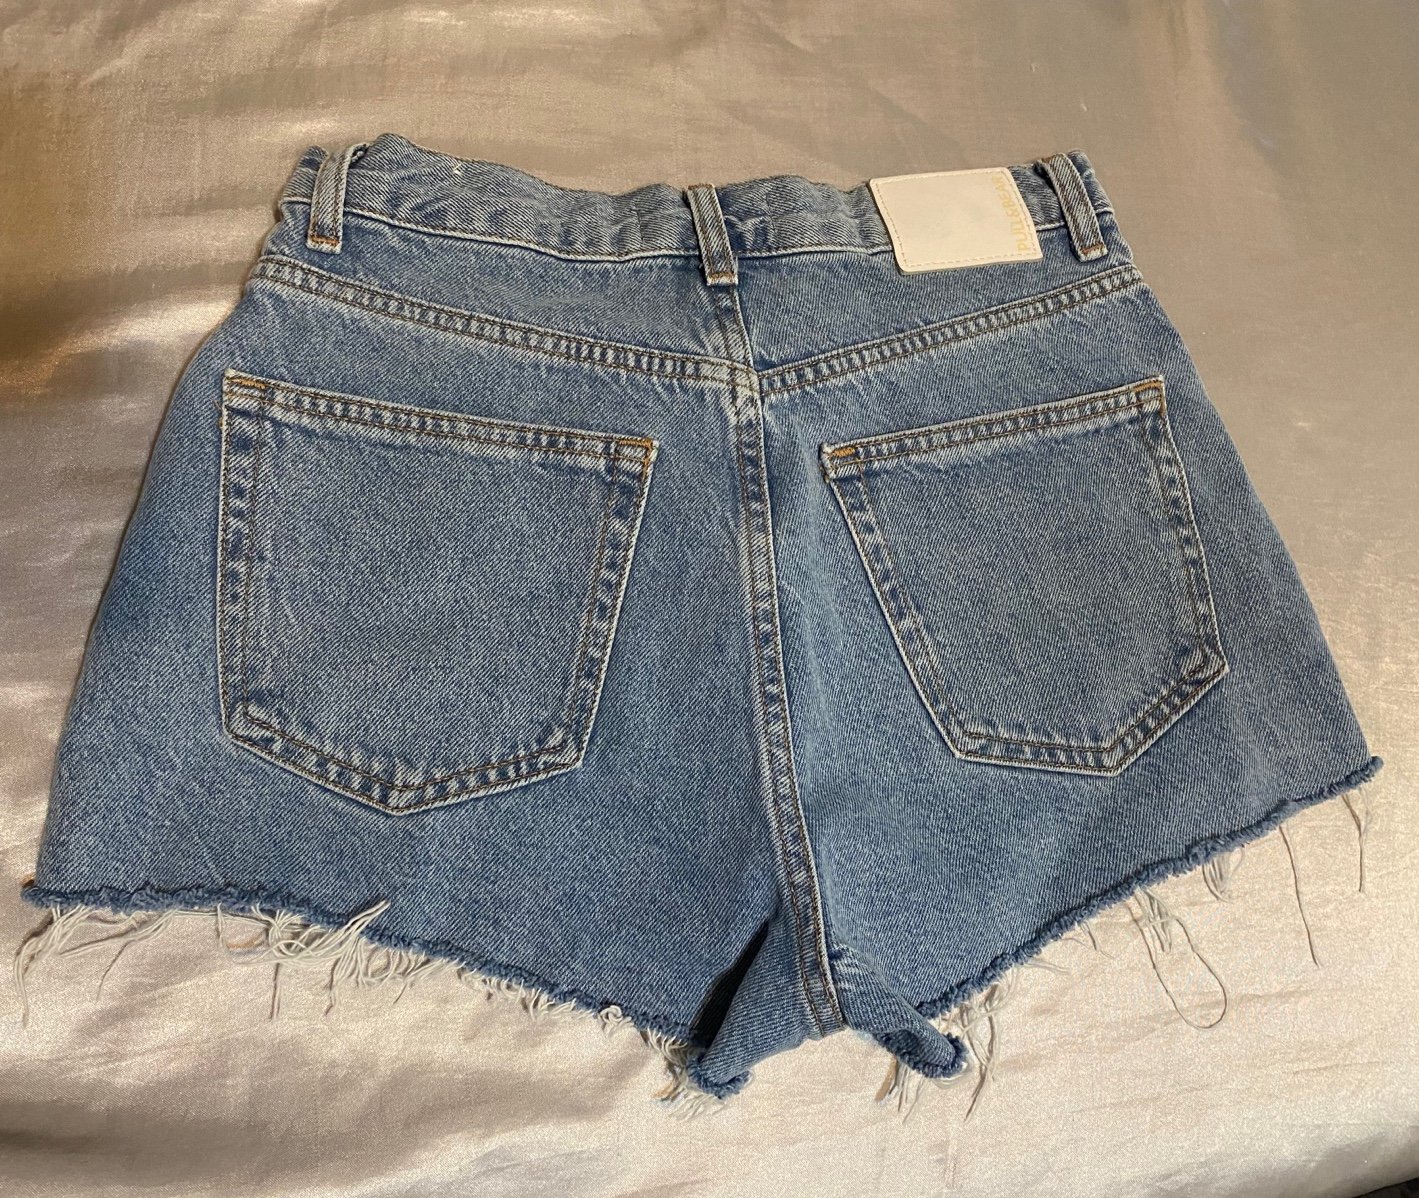 Authentic PULL&BEAR jean shorts lriTXOPCe online store